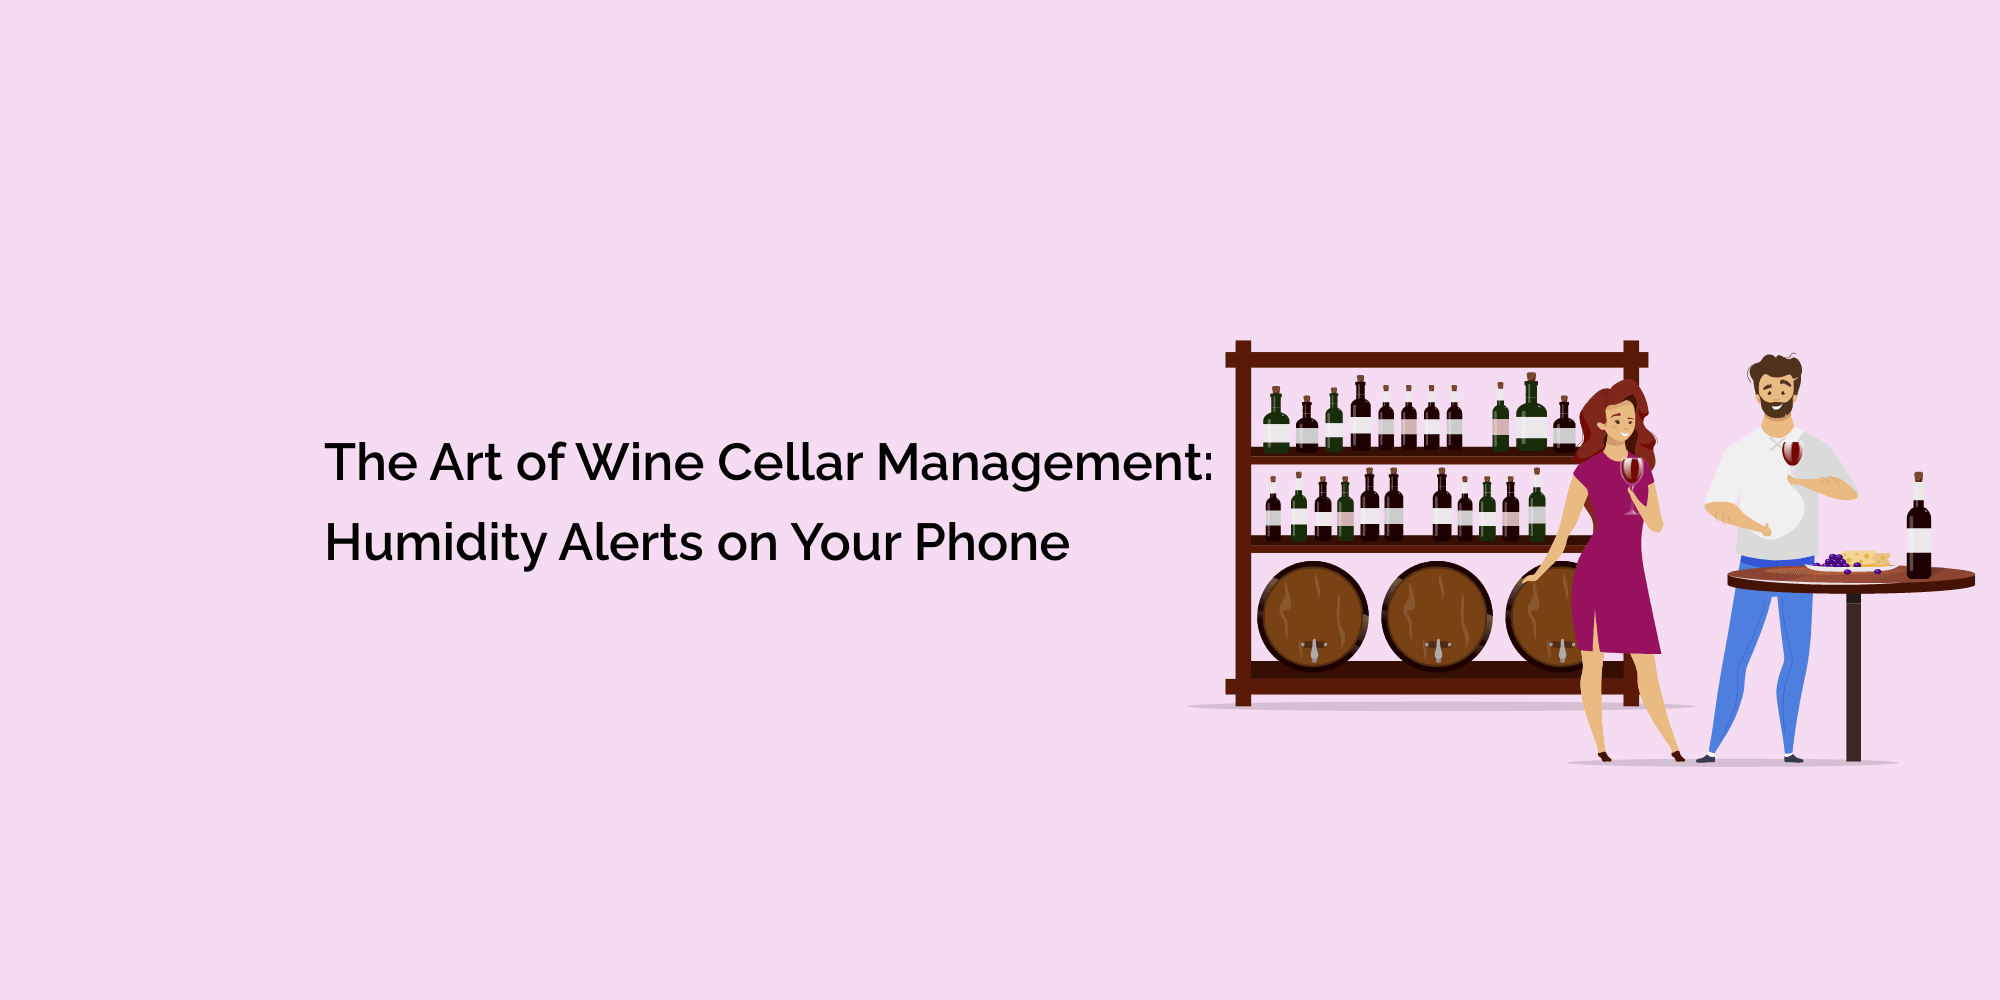 The Art of Wine Cellar Management: Humidity Alerts on Your Phone